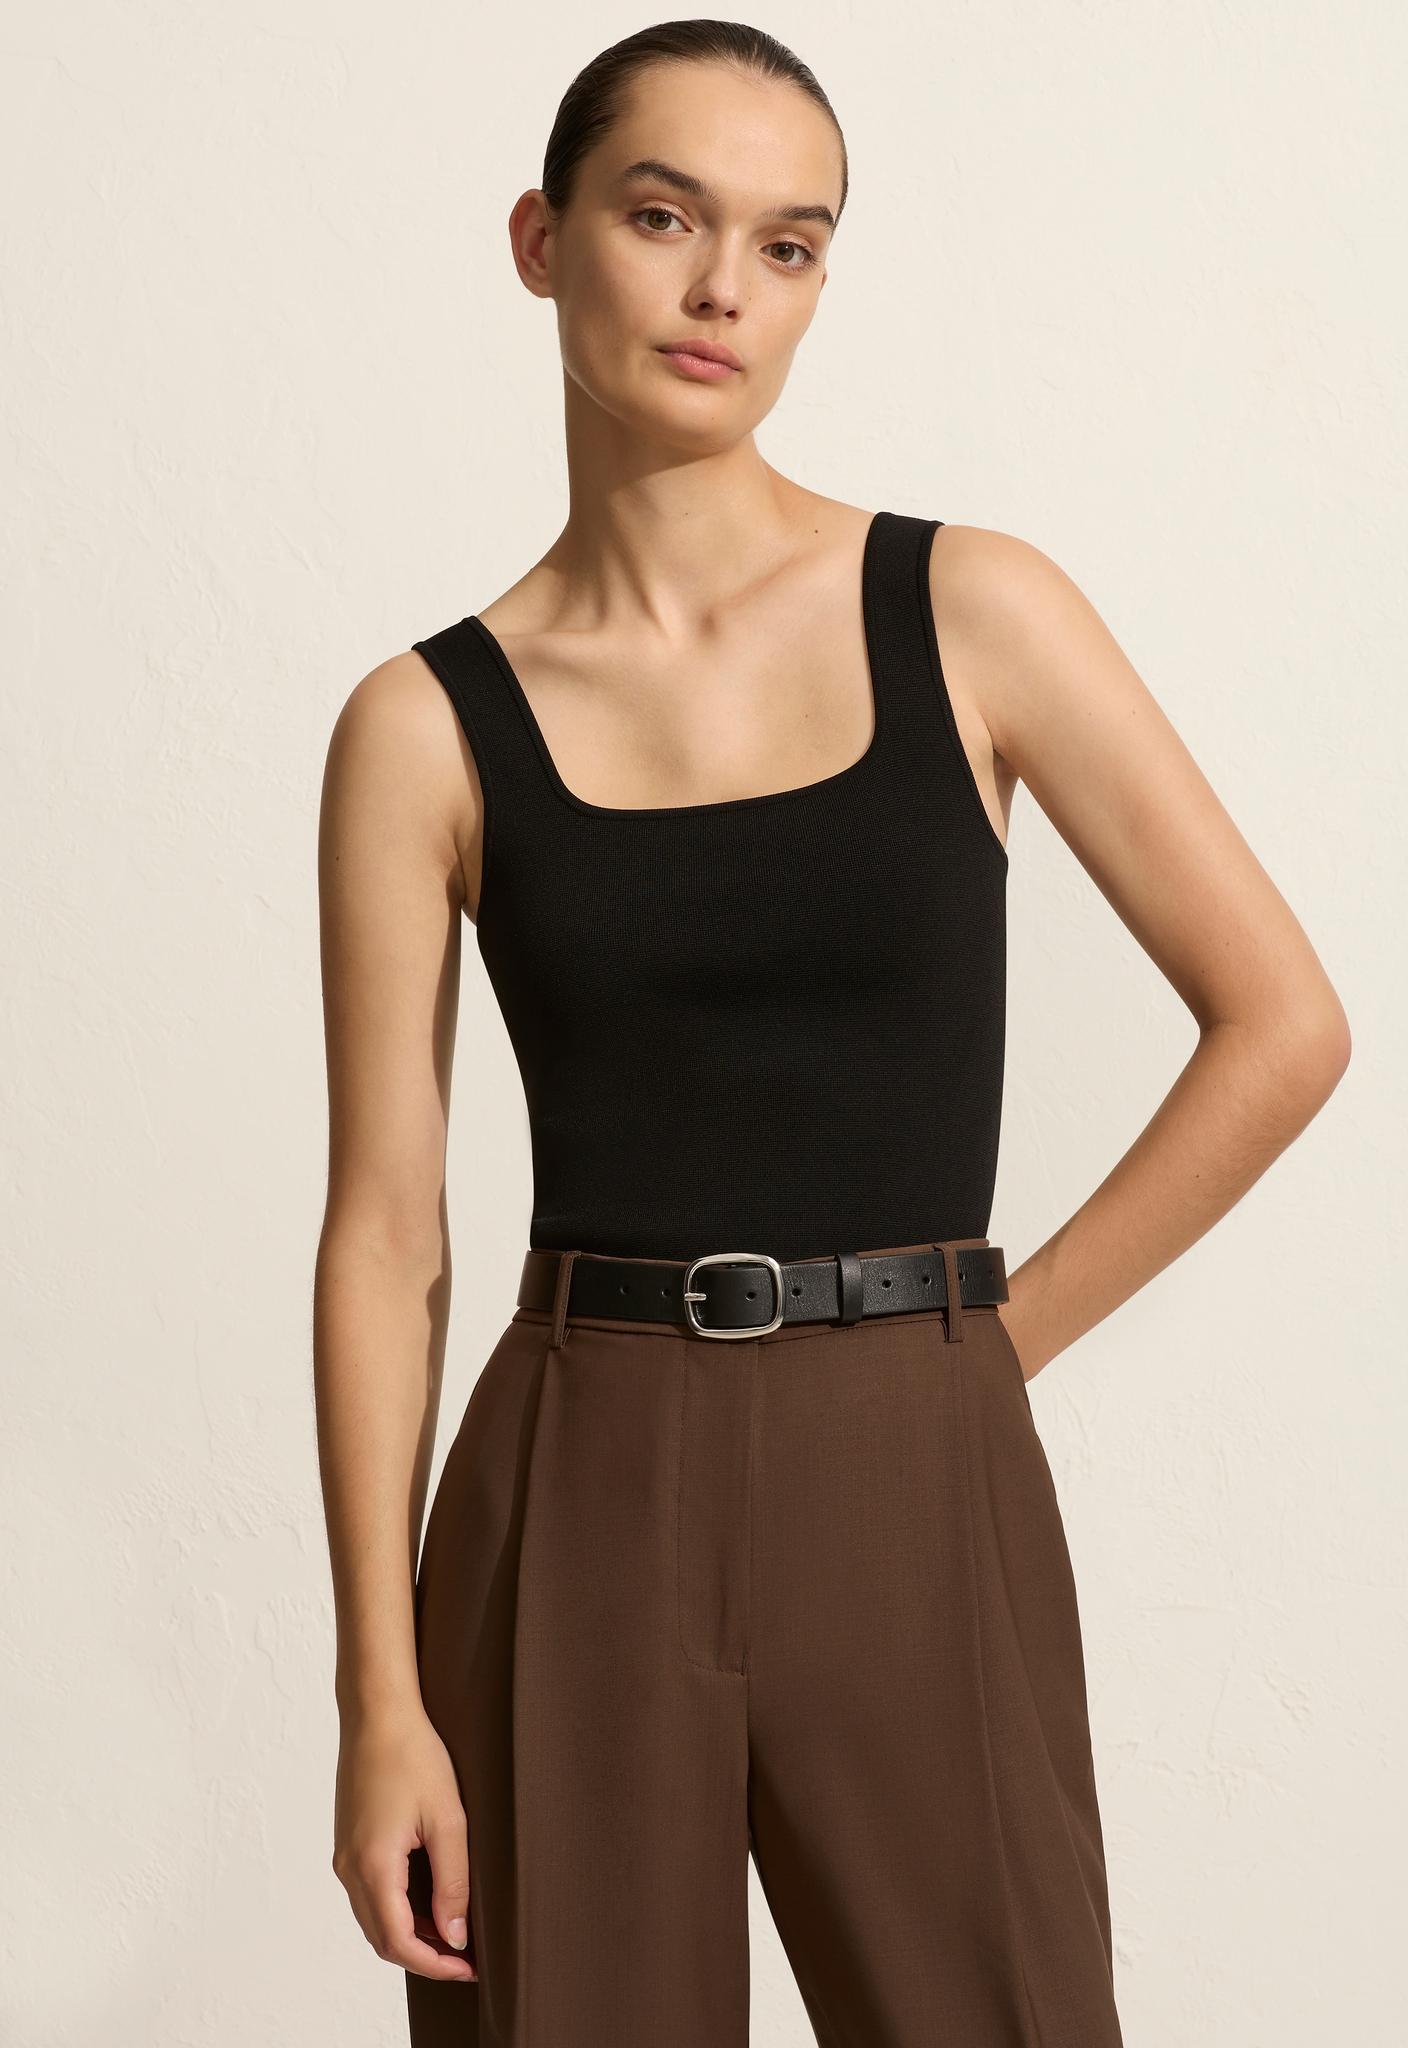 Relaxed Tailored Pleat Trouser - Coffee - Matteau